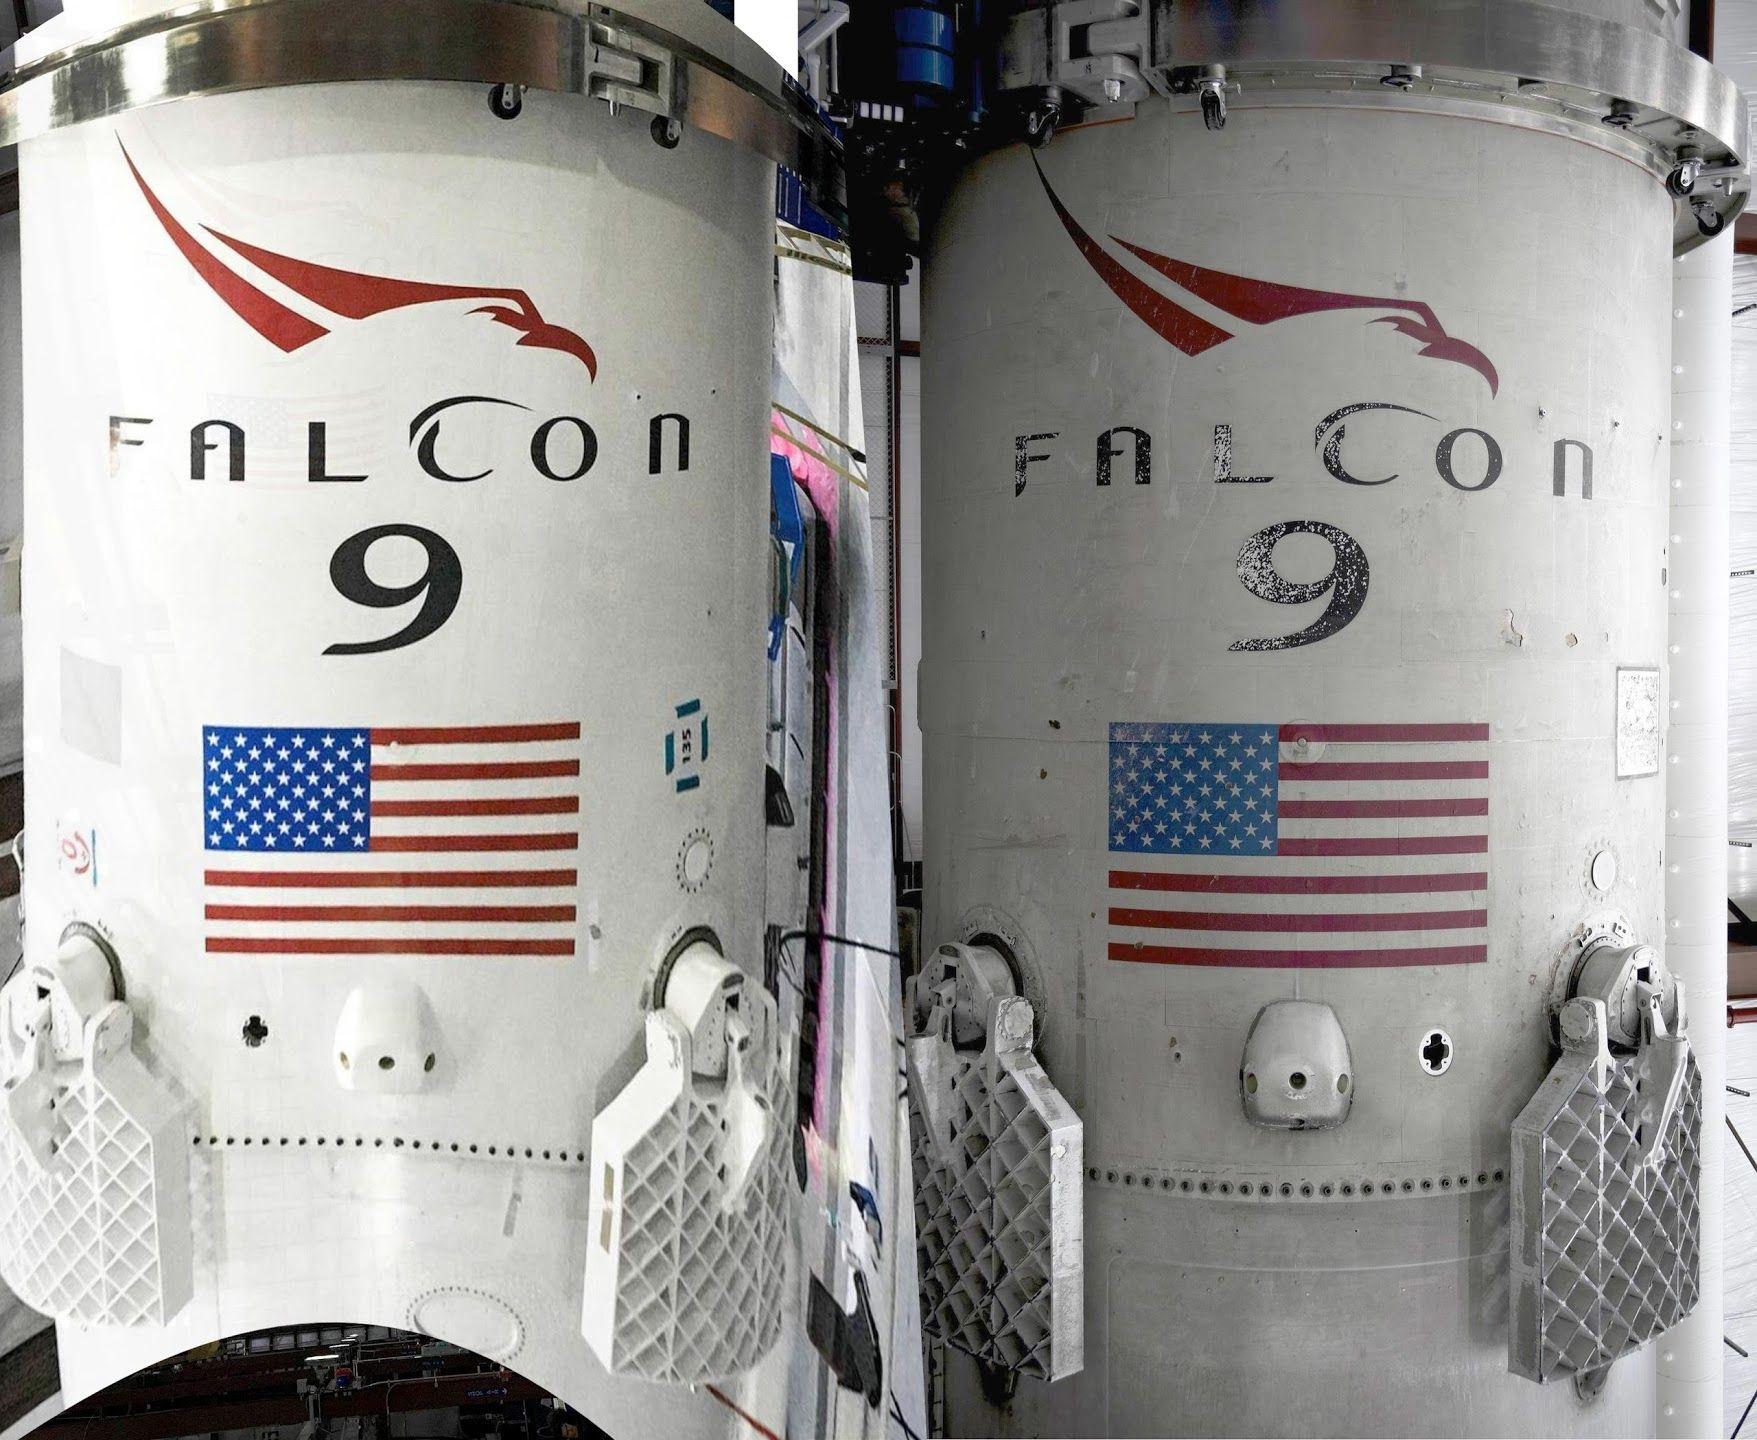 Falcon 9 Rocket Logo - SpaceX says Falcon 9 rocket is undamaged after historic landing ...